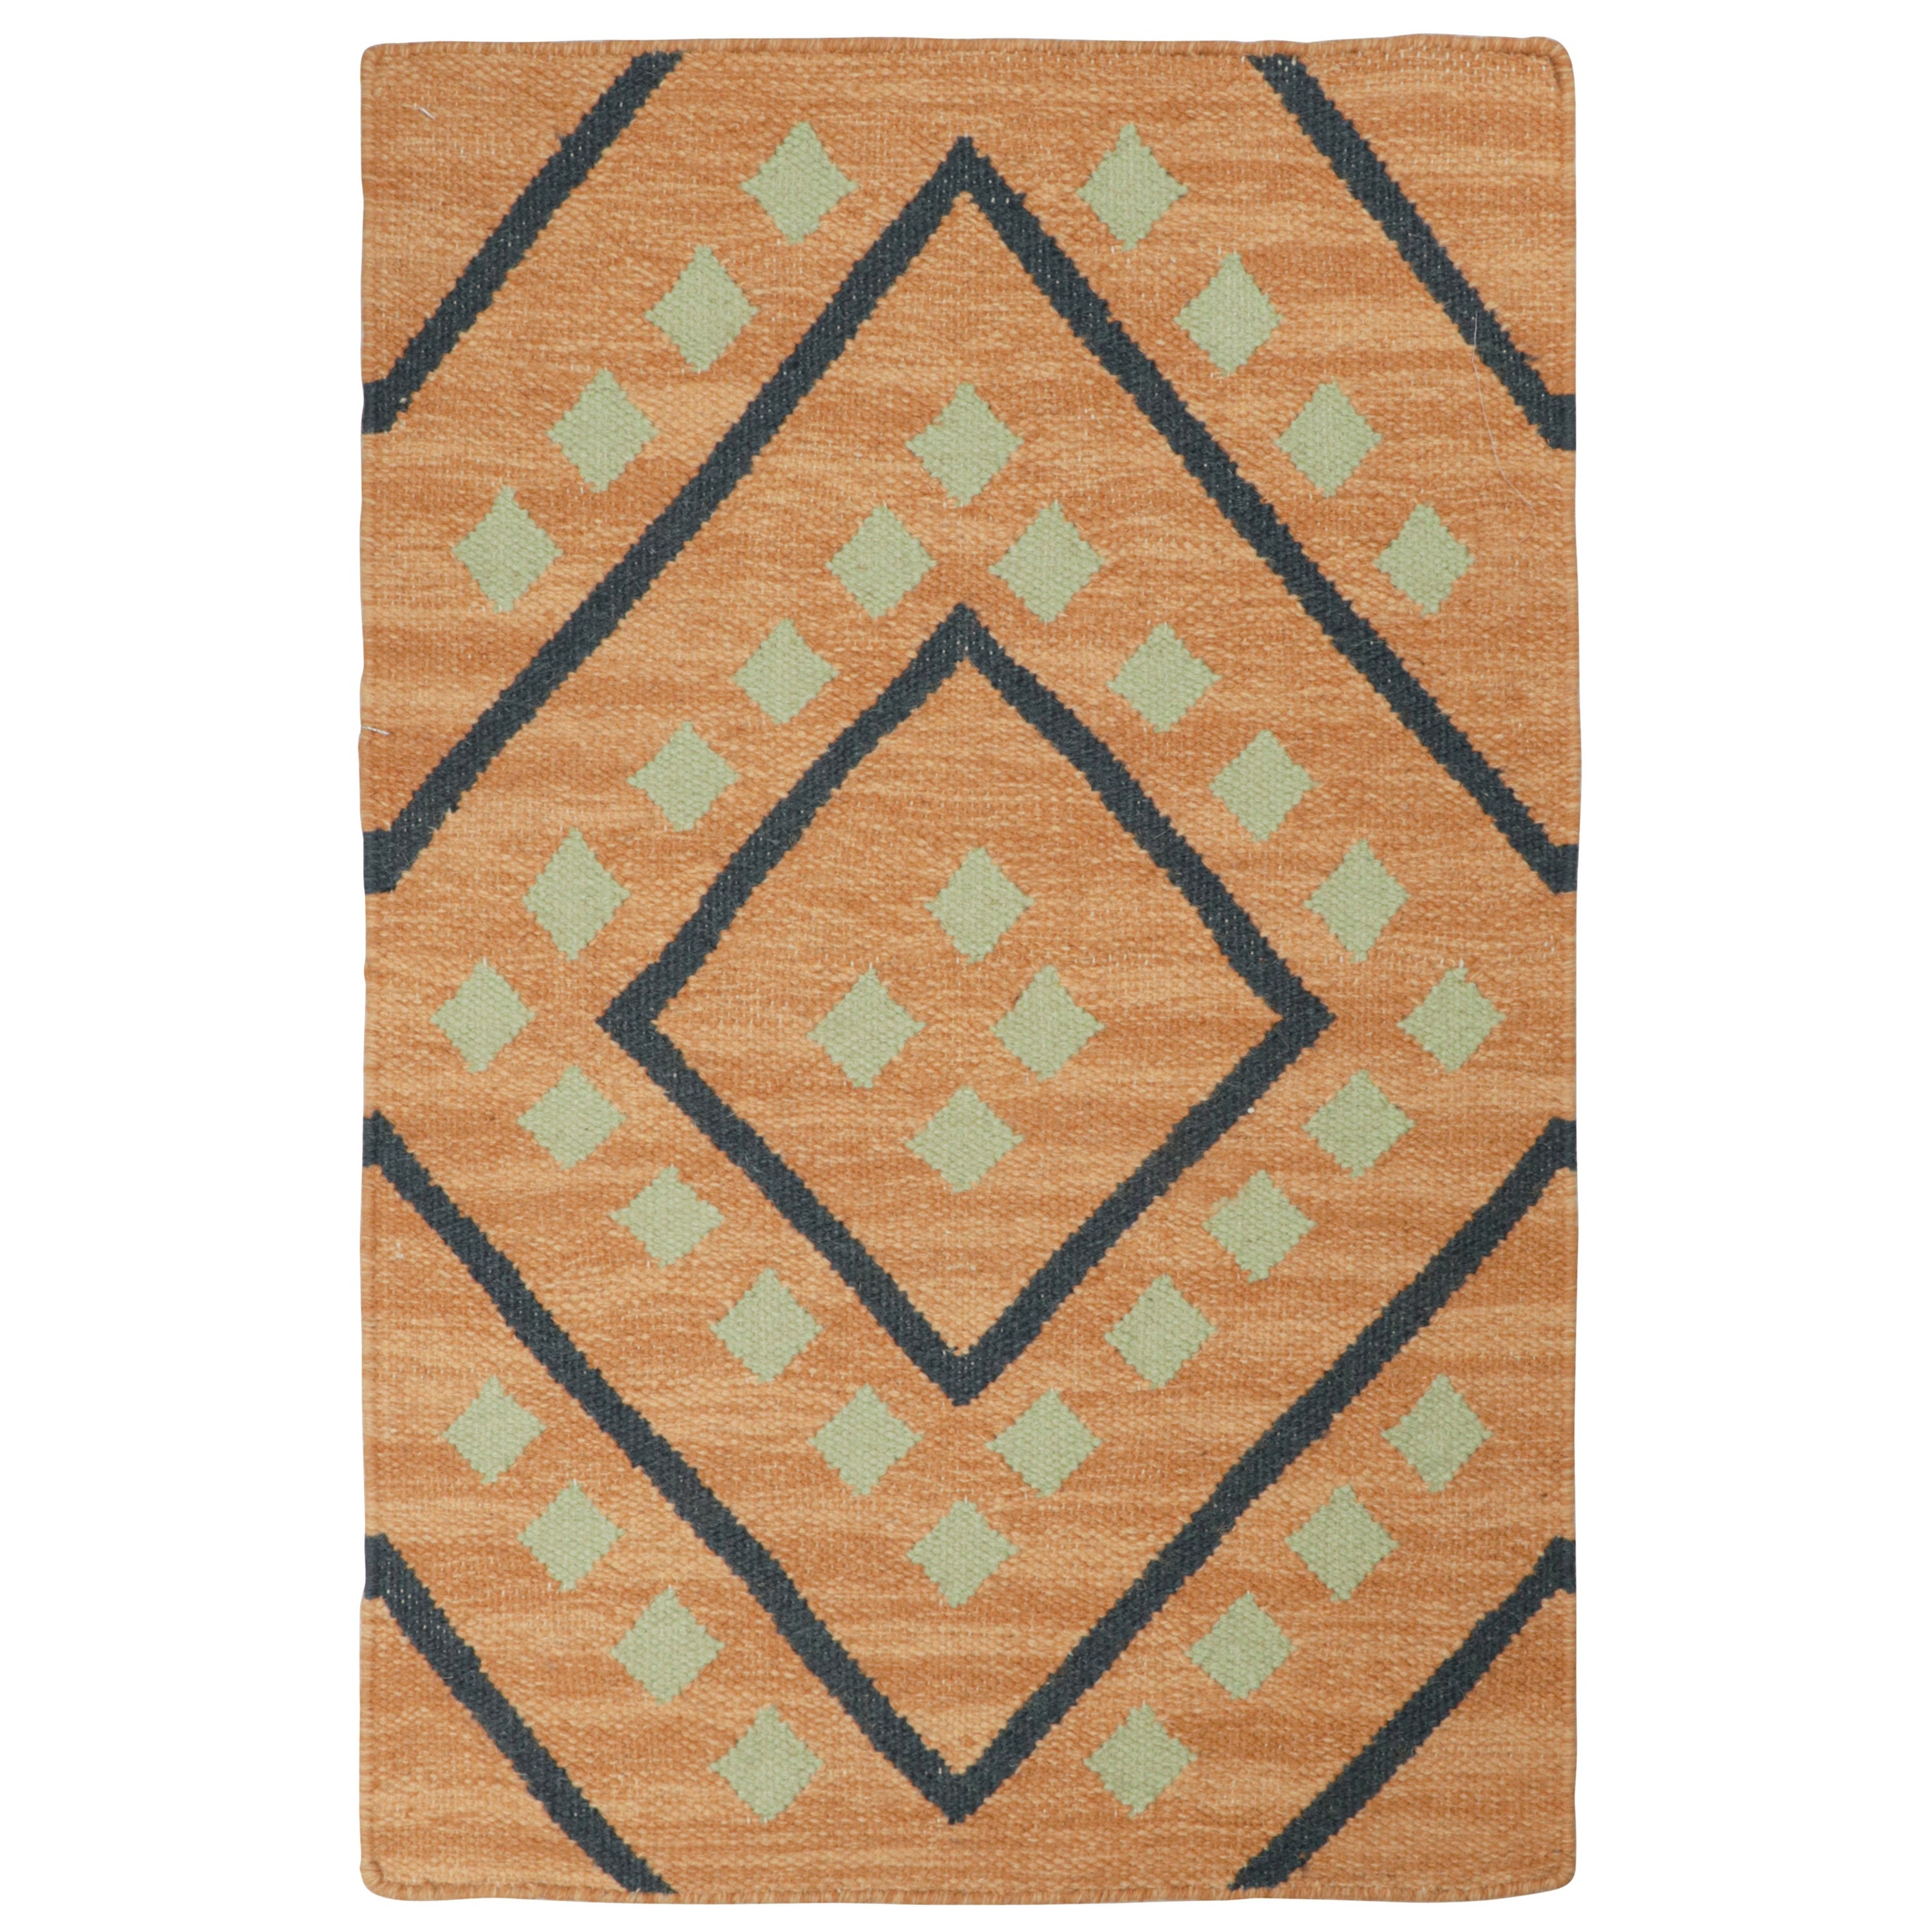 Rug & Kilim’s Tribal style Kilim in Gold with Black & Green Patterns